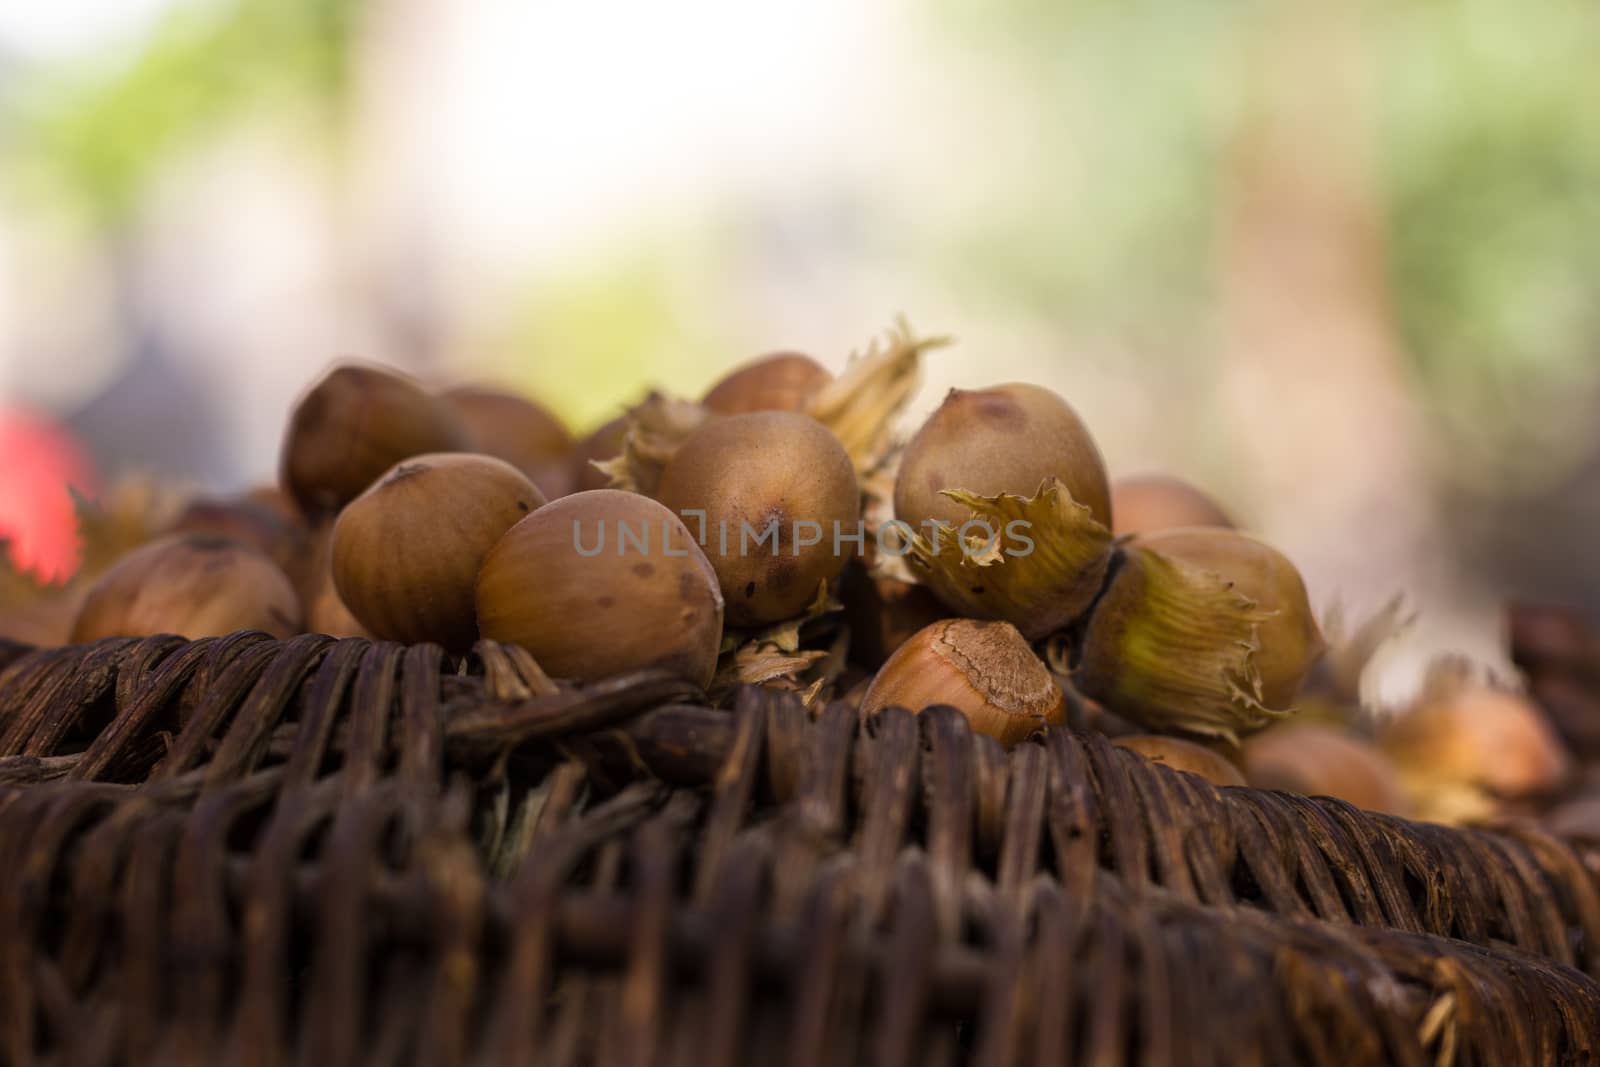 A basket of toasted hazelnuts inviting by maggee